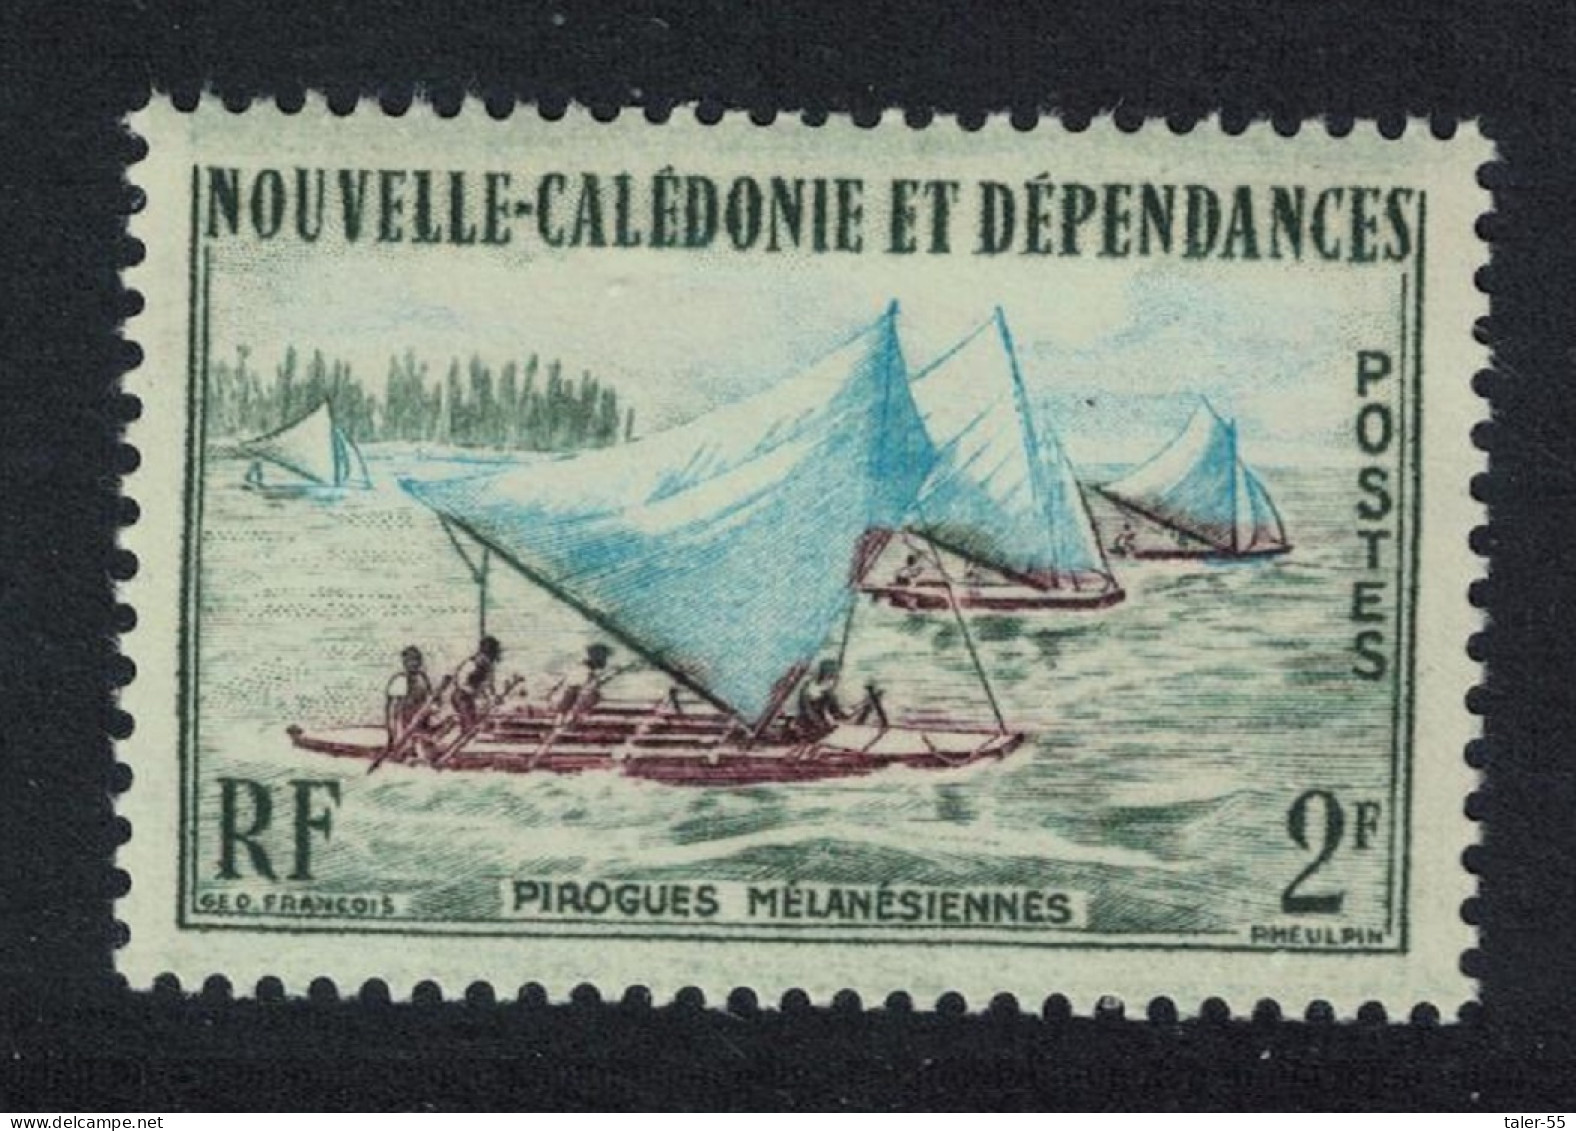 New Caledonia Outrigger Canoes Racing 2f 1959 MNH SG#345 - Nuovi